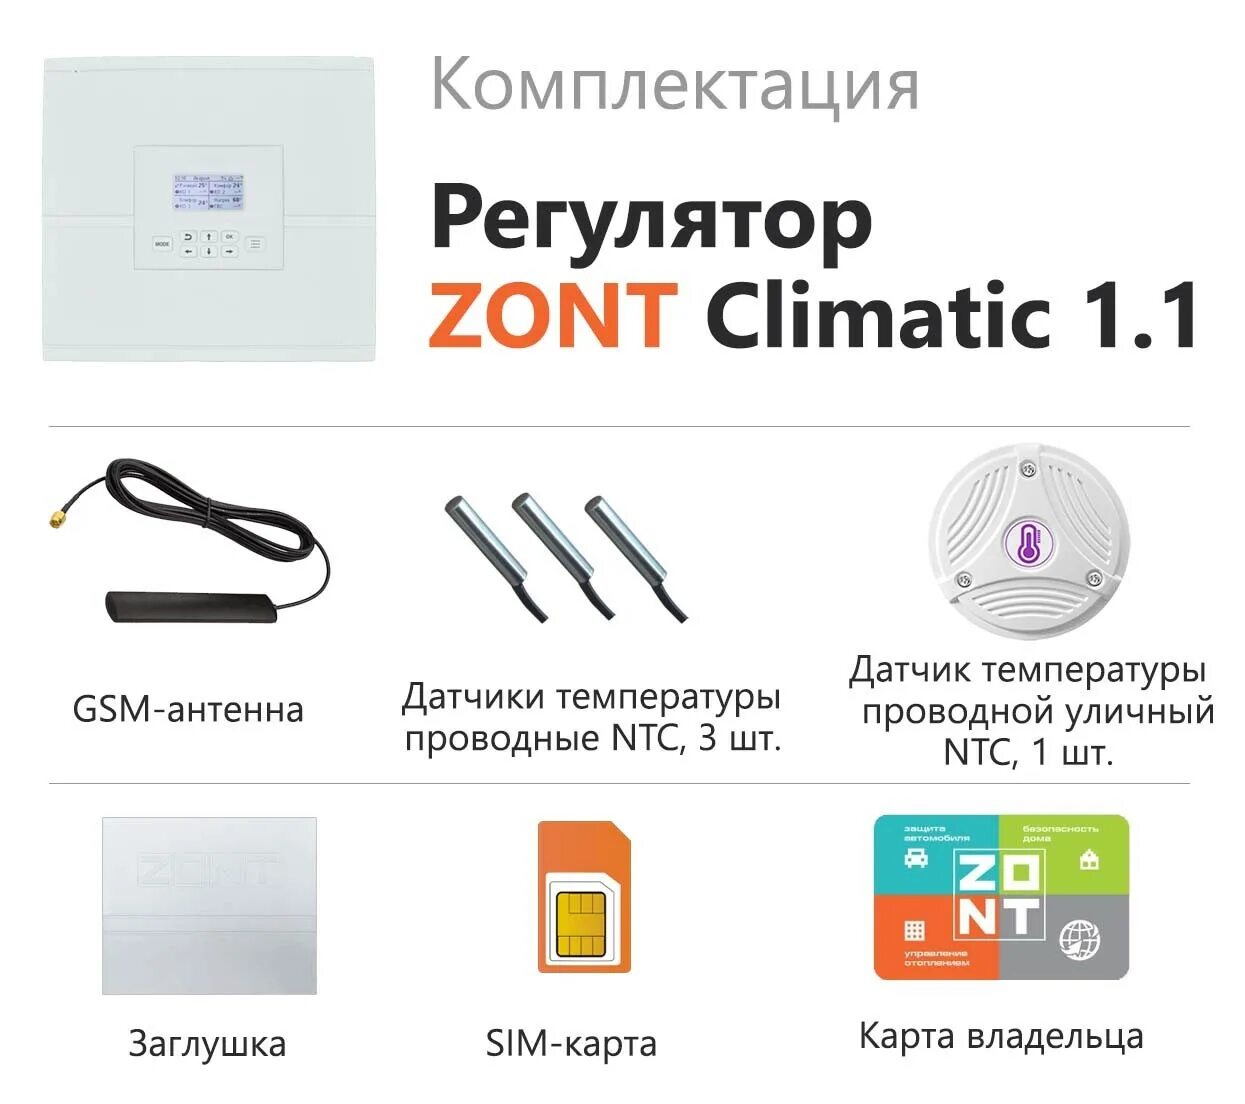 Zont климатик 1.3. Zont climatic 1.2. Zont climatic 1.3 автоматический регулятор. Автоматический регулятор Zont climatic 1.2.